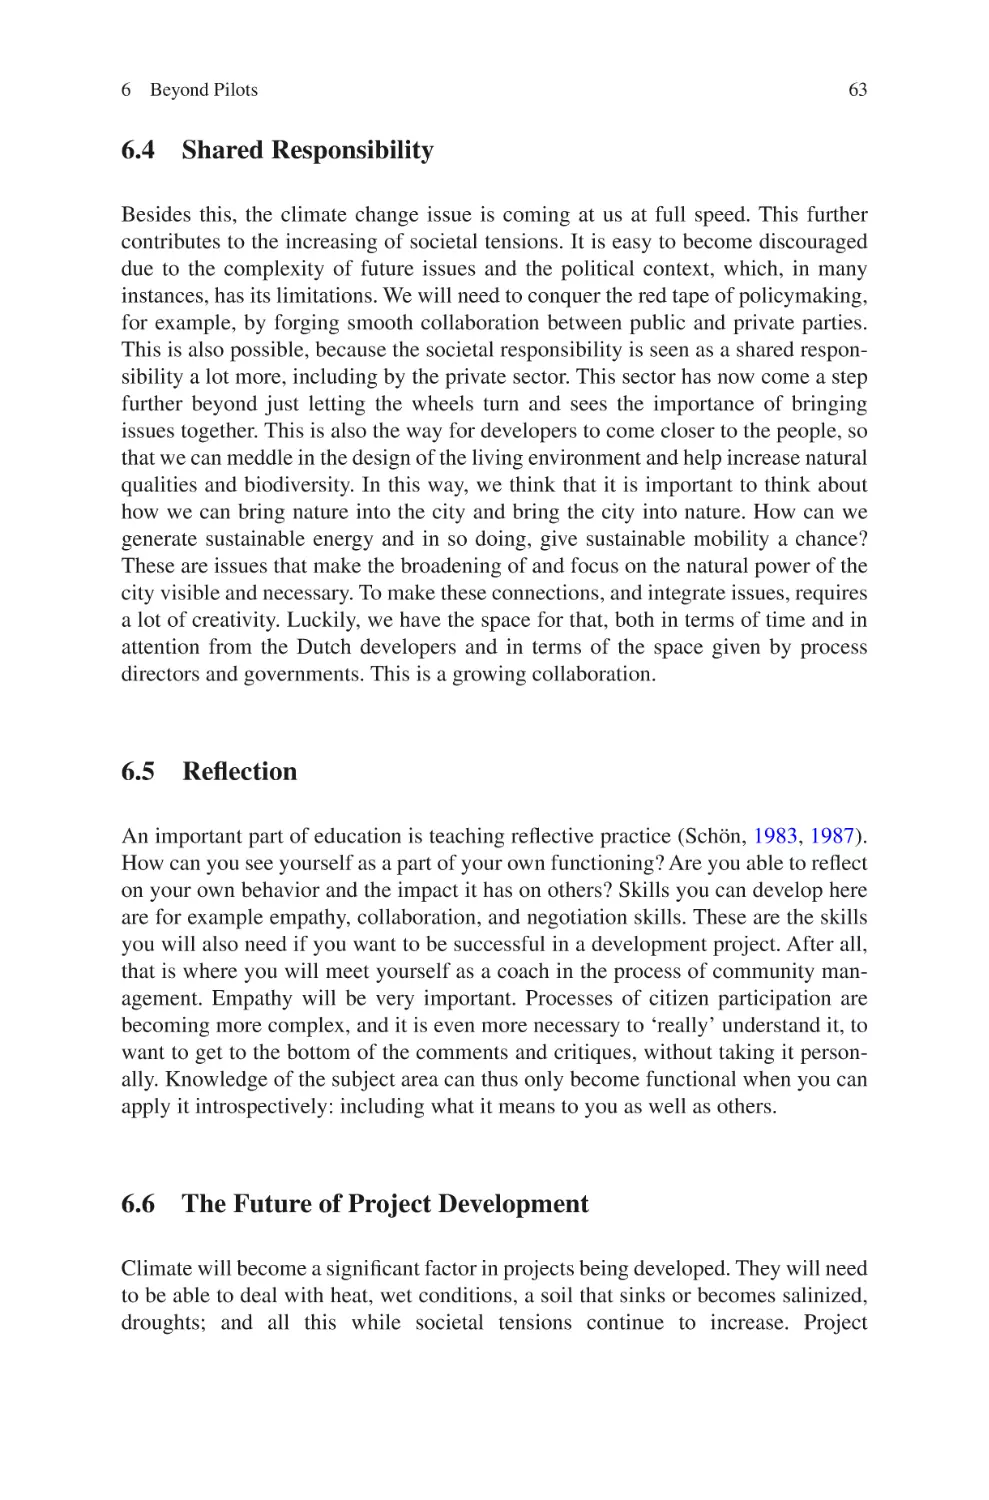 6.4 Shared Responsibility
6.5 Reflection
6.6 The Future of Project Development